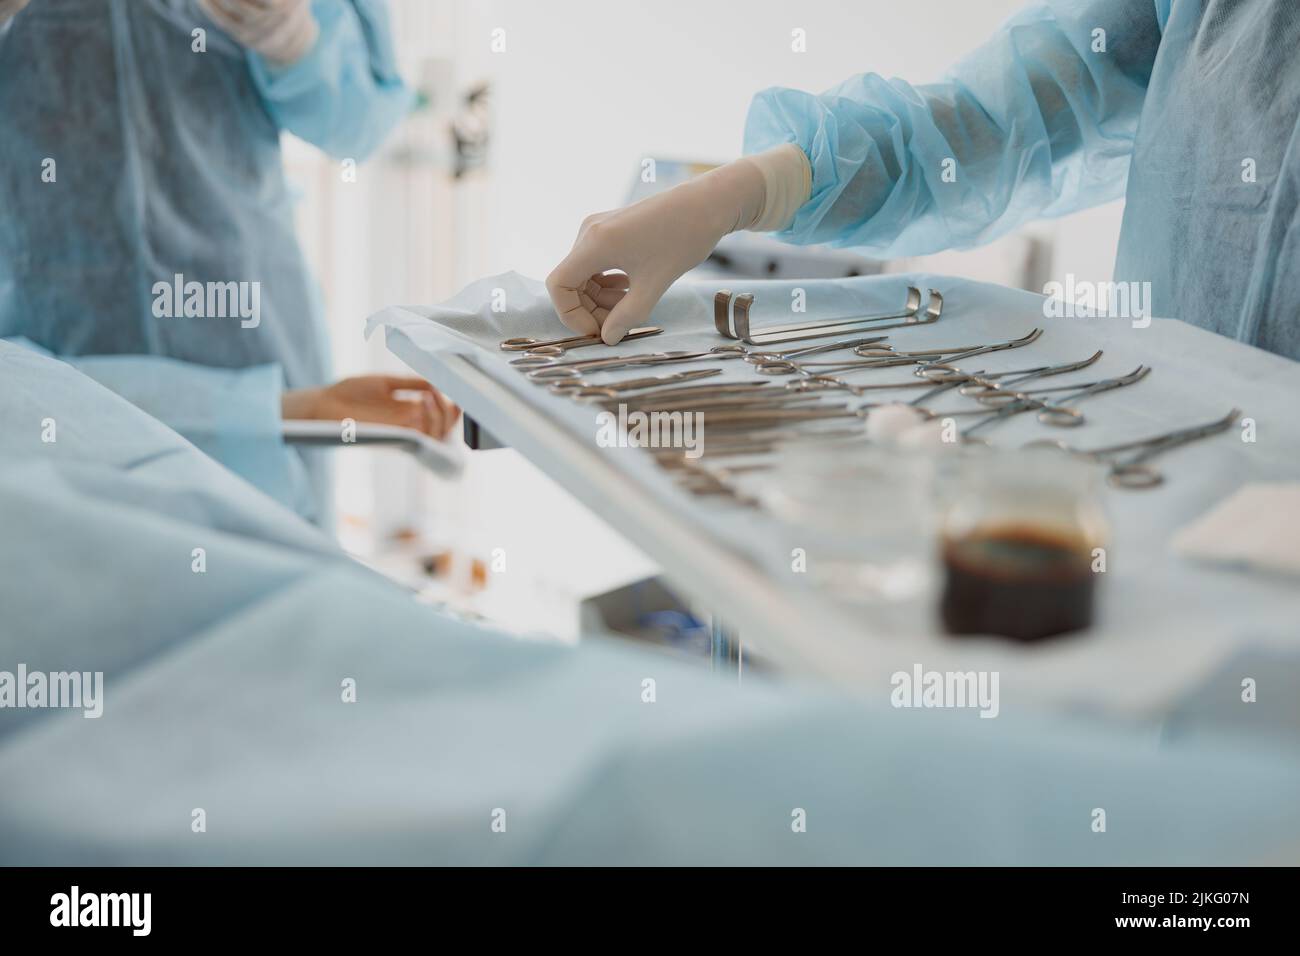 Nurse hand taking surgical instruments from table for a surgery during operation Stock Photo